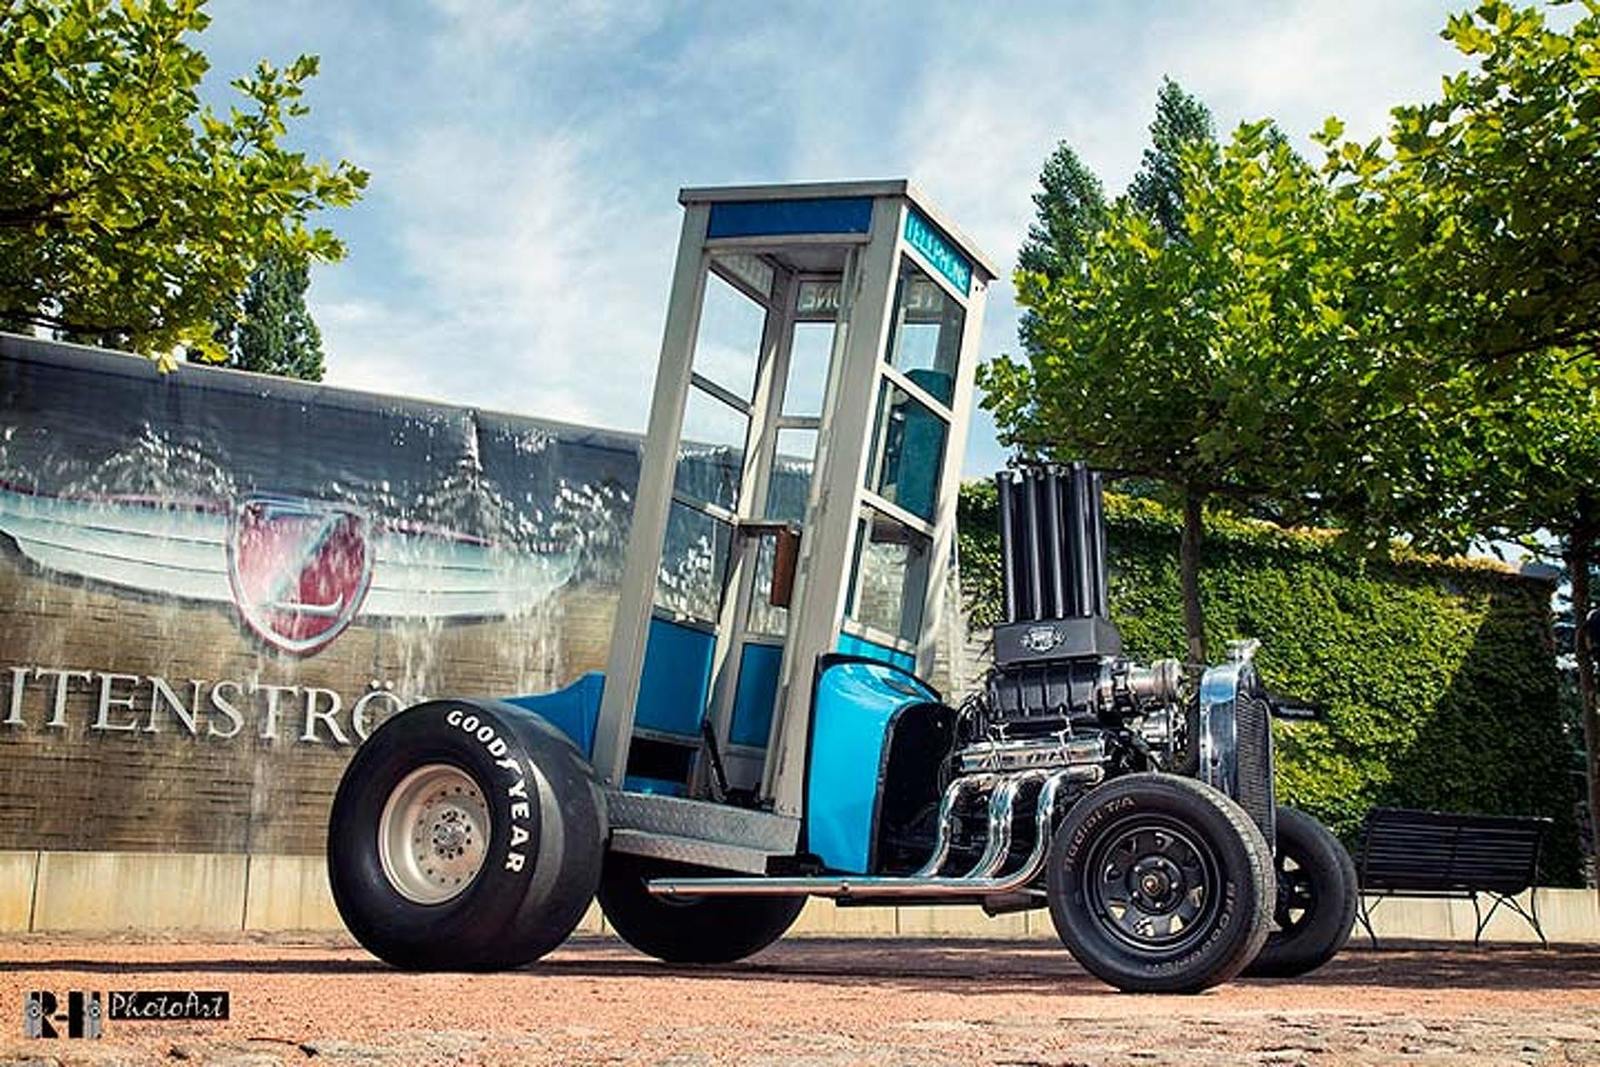 this-ford-hot-rod-might-be-the-worlds-fastest-phone-booth.jpg